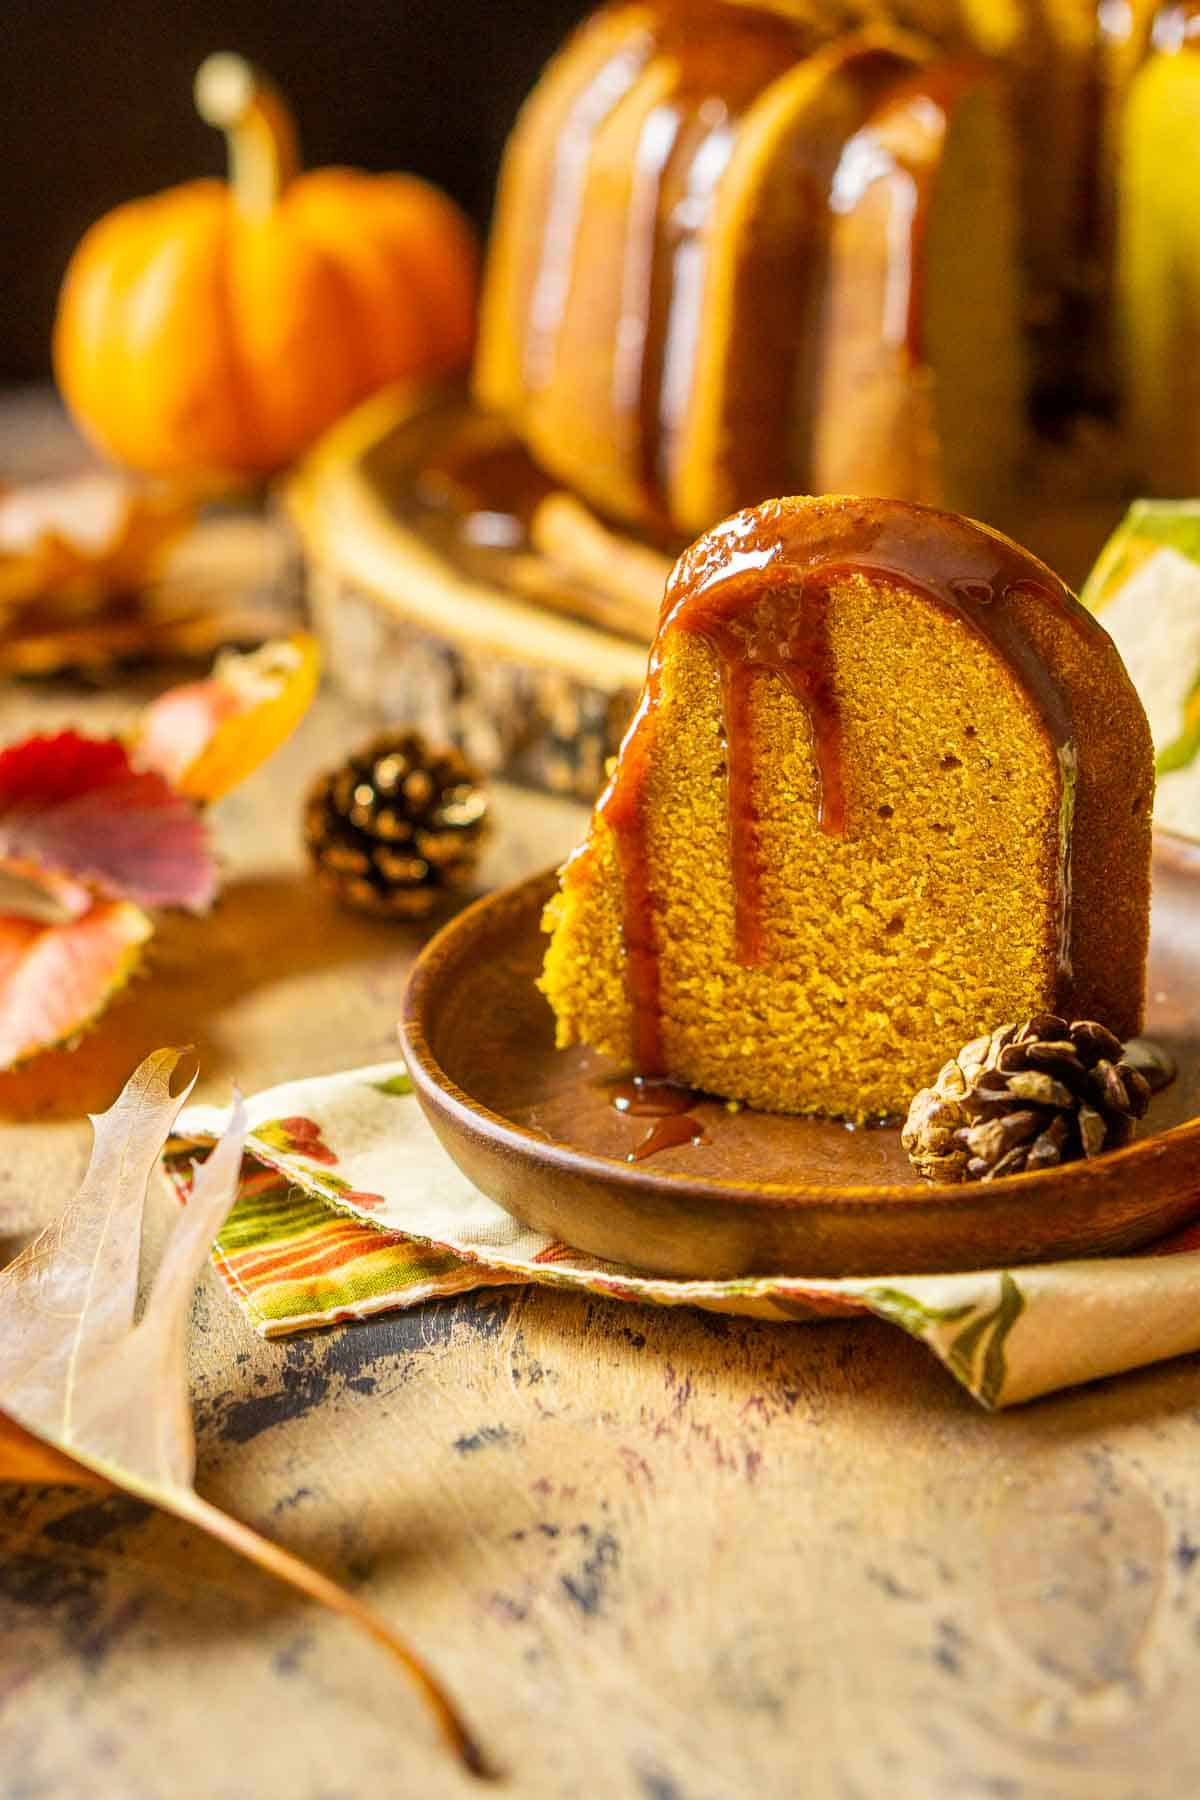 A slice of the pumpkin pound cake on a small wooden plate with the rest of the cake in the background and fall decor around it.